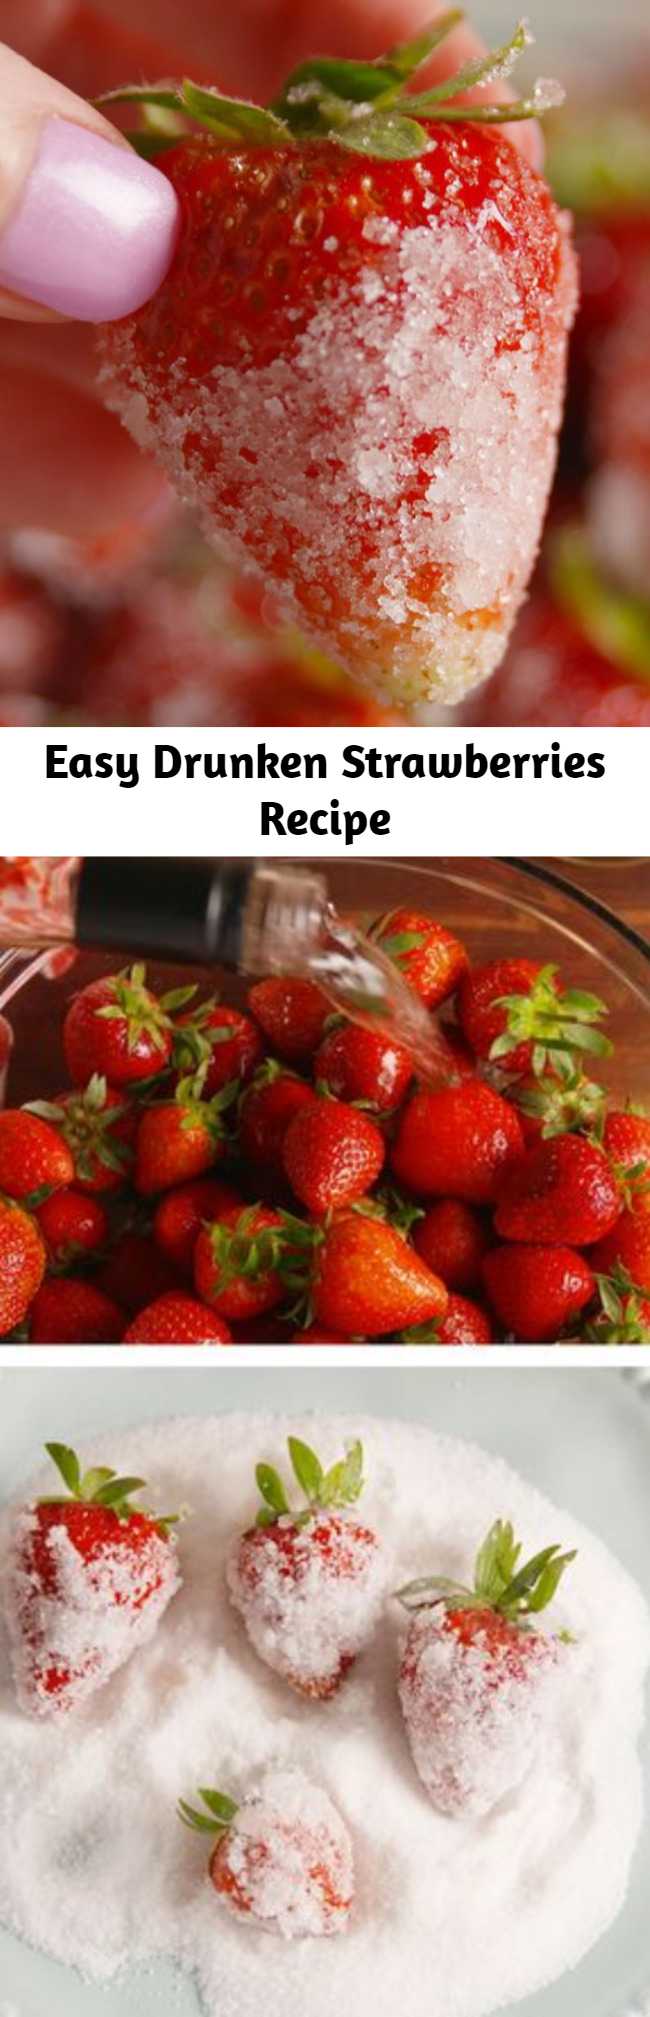 Easy Drunken Strawberries Recipe - This easy drunken strawberries recipe or whatever you want to call them, you’ll be calling them the perfect summer treat! Perfect to eat by themsleves or top a dessert. Easy to make with just 3 ingredients, you are going to love these boozy frozen strawberries!